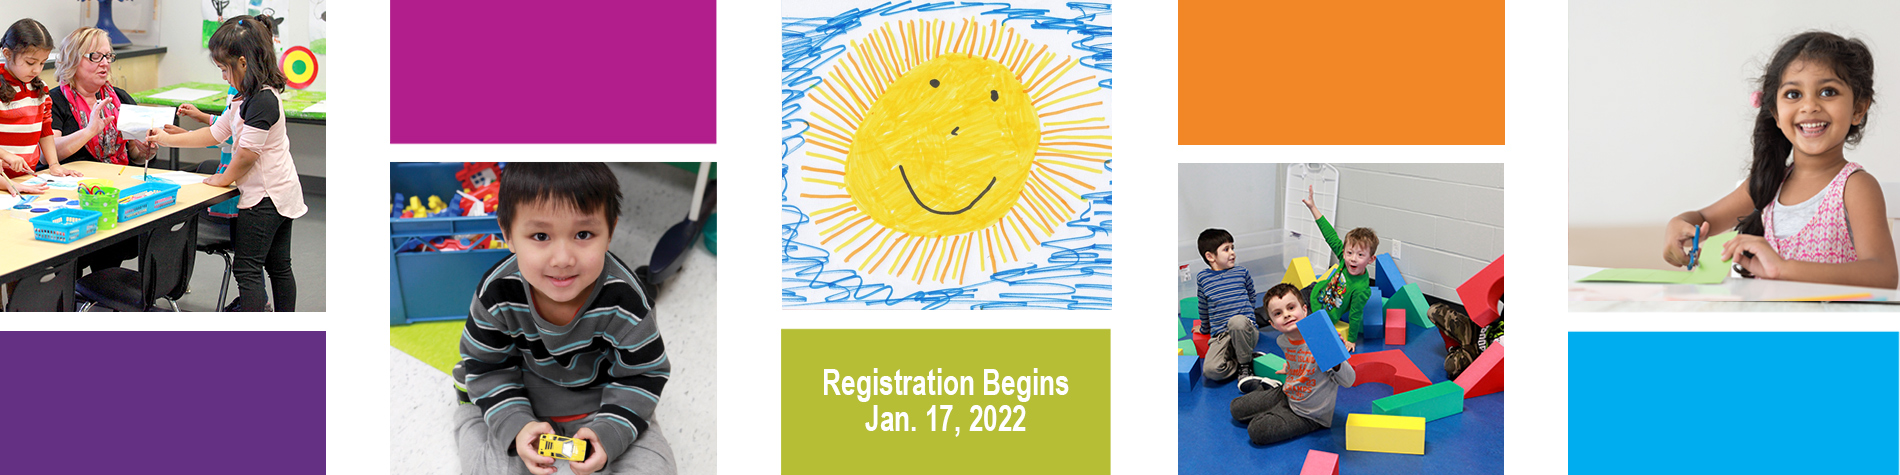 <p class="slider-title">Kindergarten | Great Learning Starts Here</p><div class="banner-line"></div><p class="slider-subtitle">Registration begins Jan. 17, 2022.</p> <a style="pointer-events:all" class=AEBannerMoreLink href="https://www.cbe.ab.ca/programs/kindergarten/Pages/default.aspx">Read More</a>